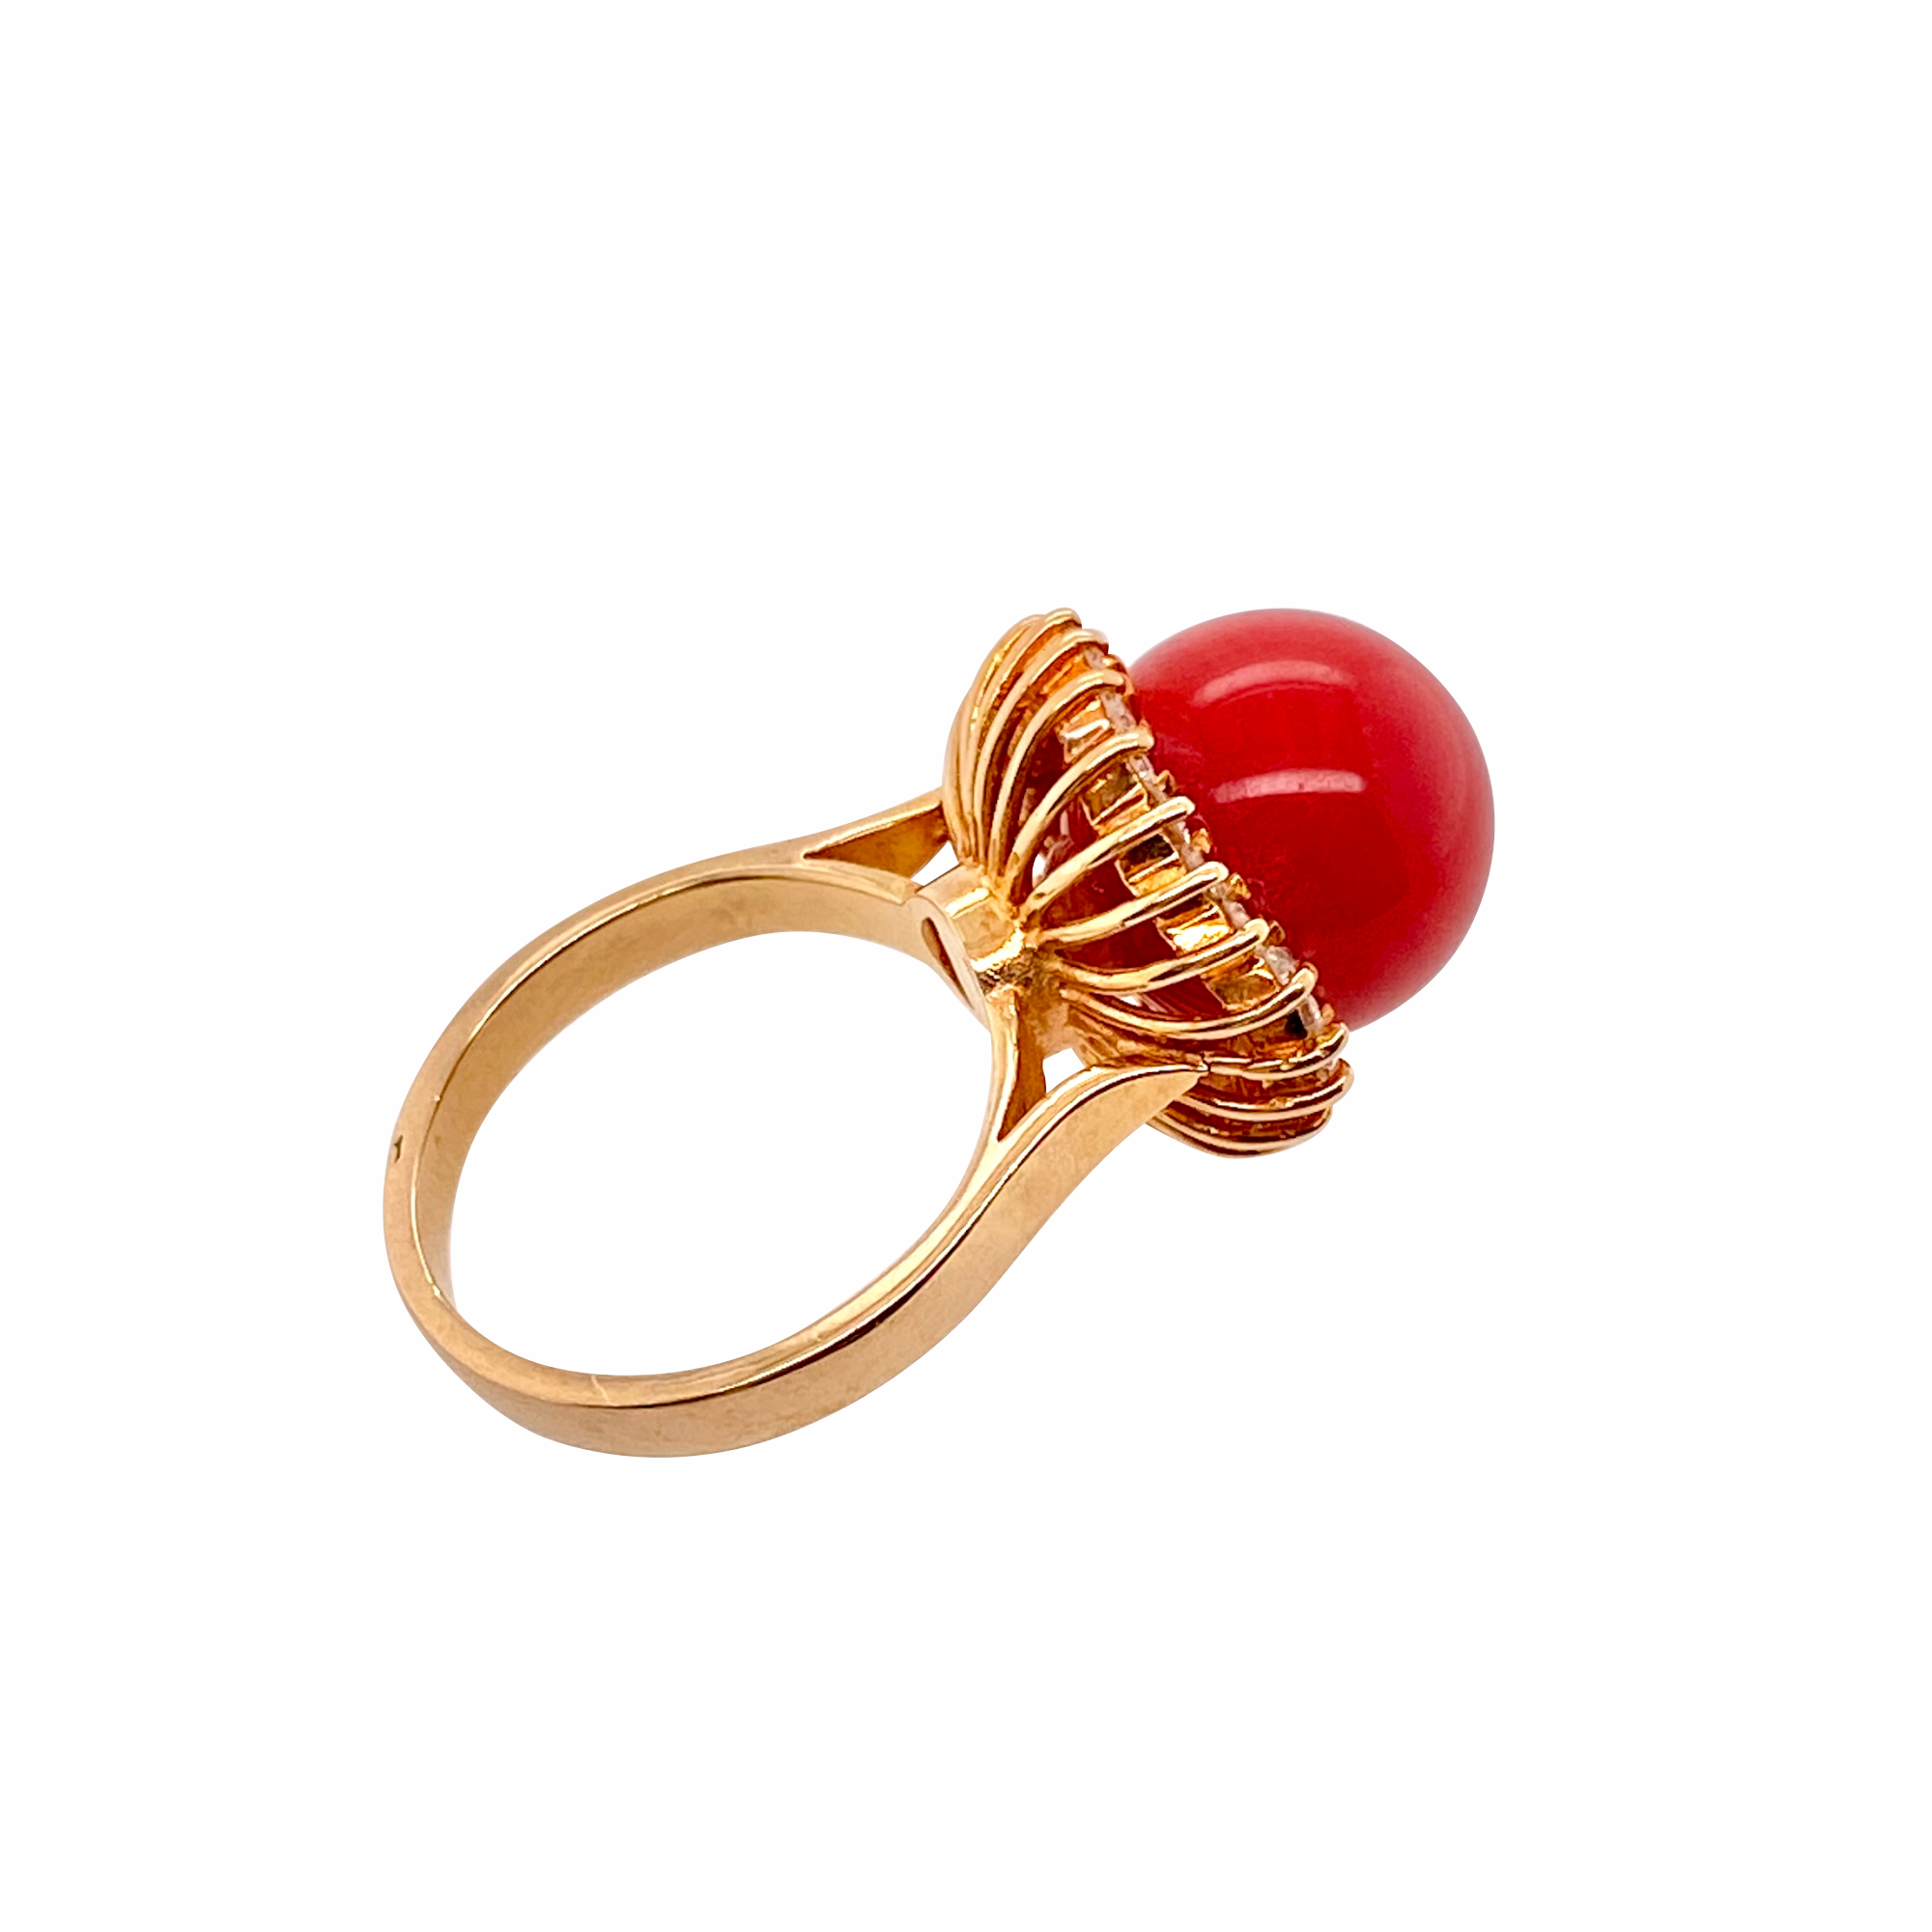 Moonga red coral adjustable ring - Dr Vedant Sharmaa